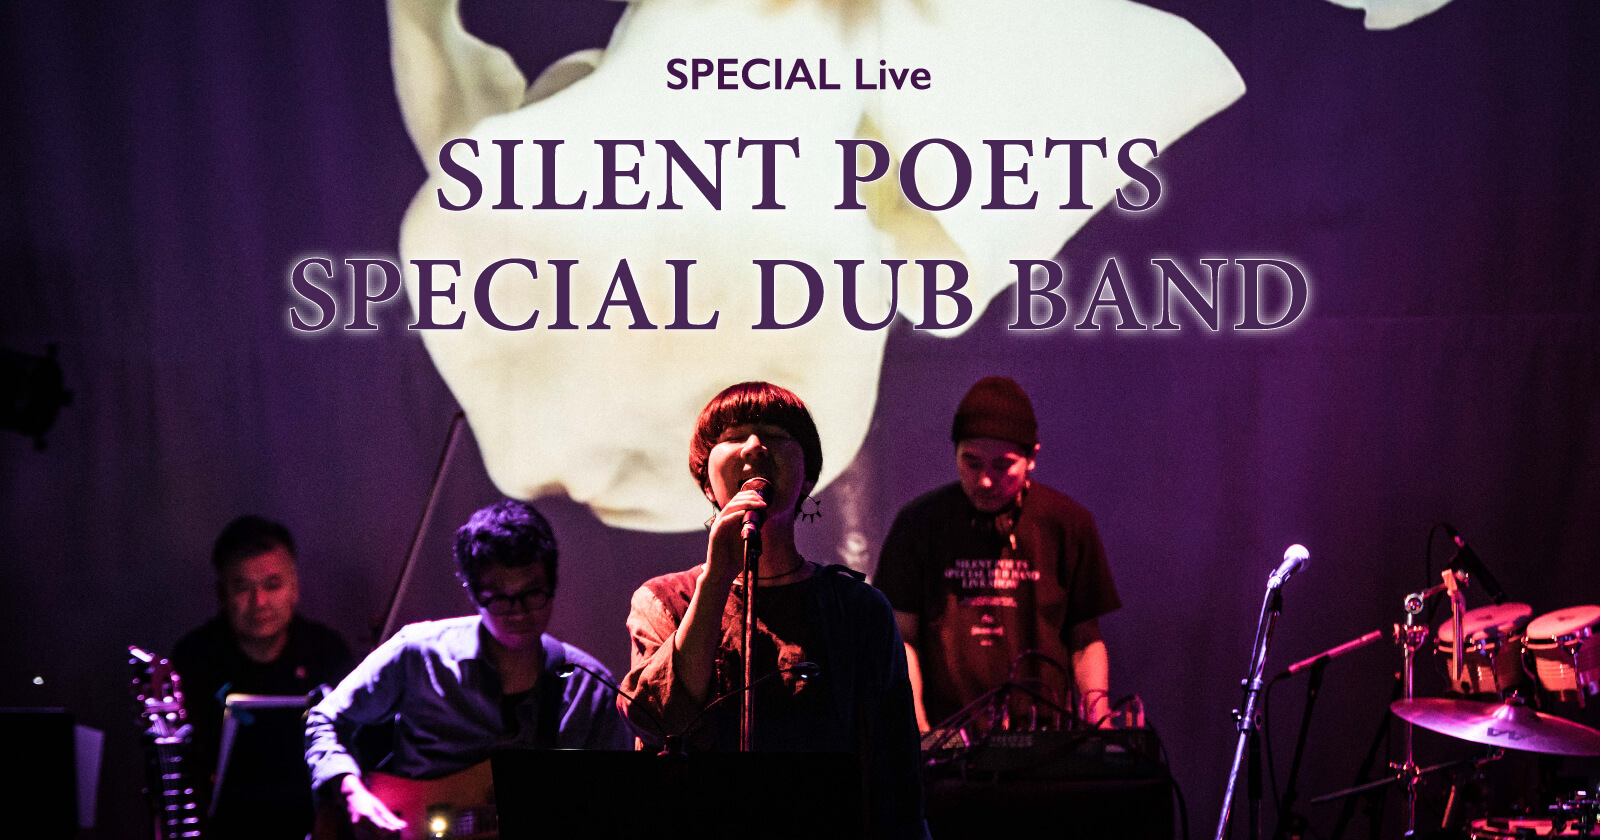 SILENT POETS SPECIAL DUB BAND